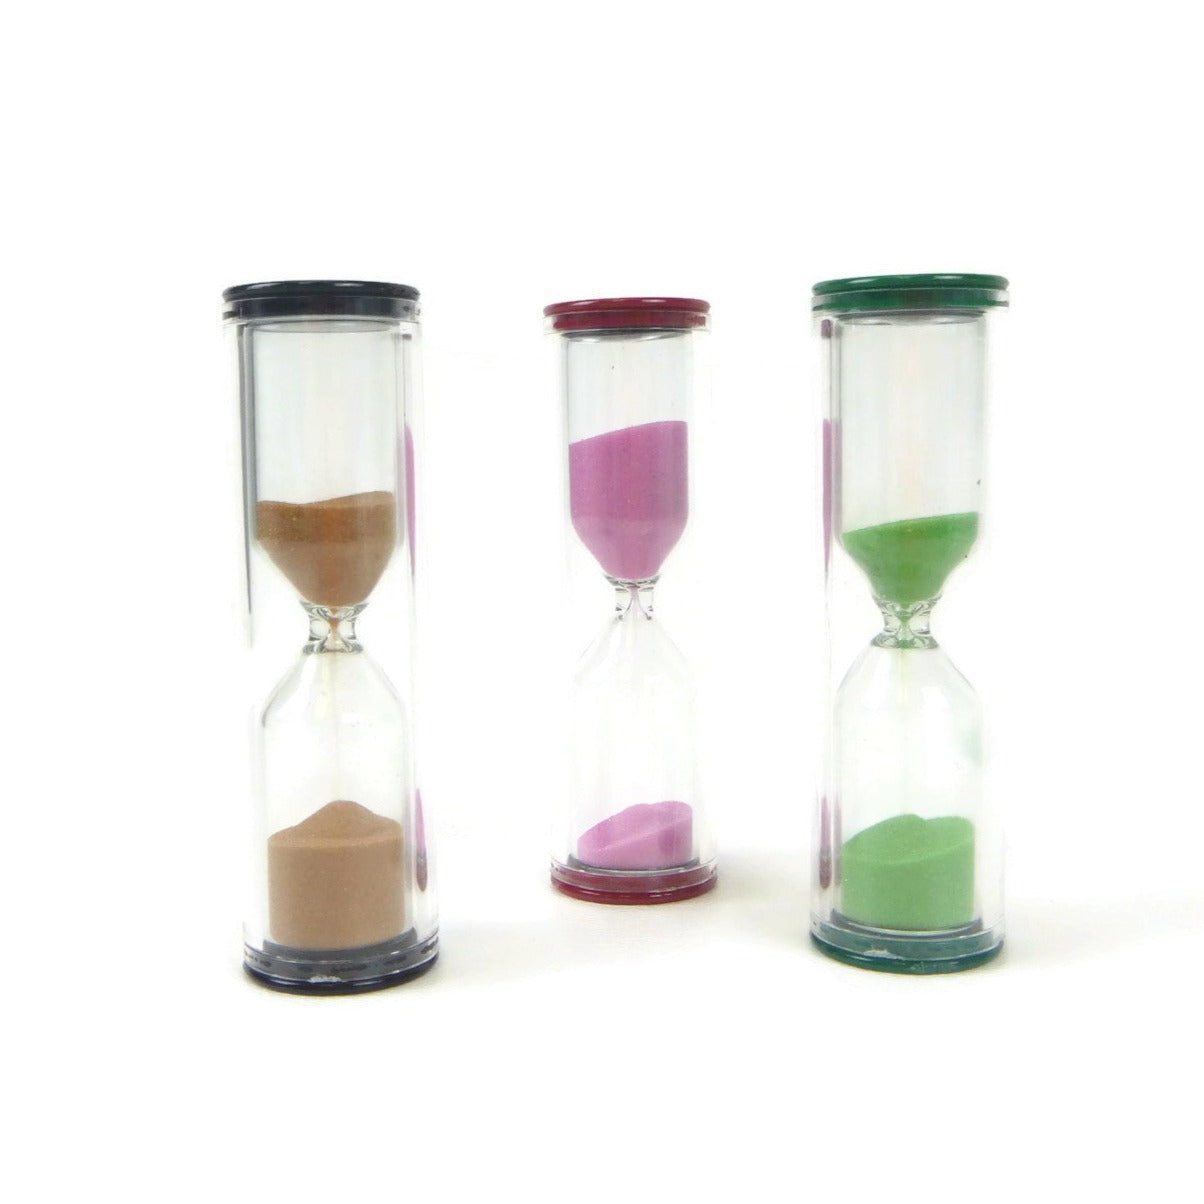 Tea Timers - Single Timers